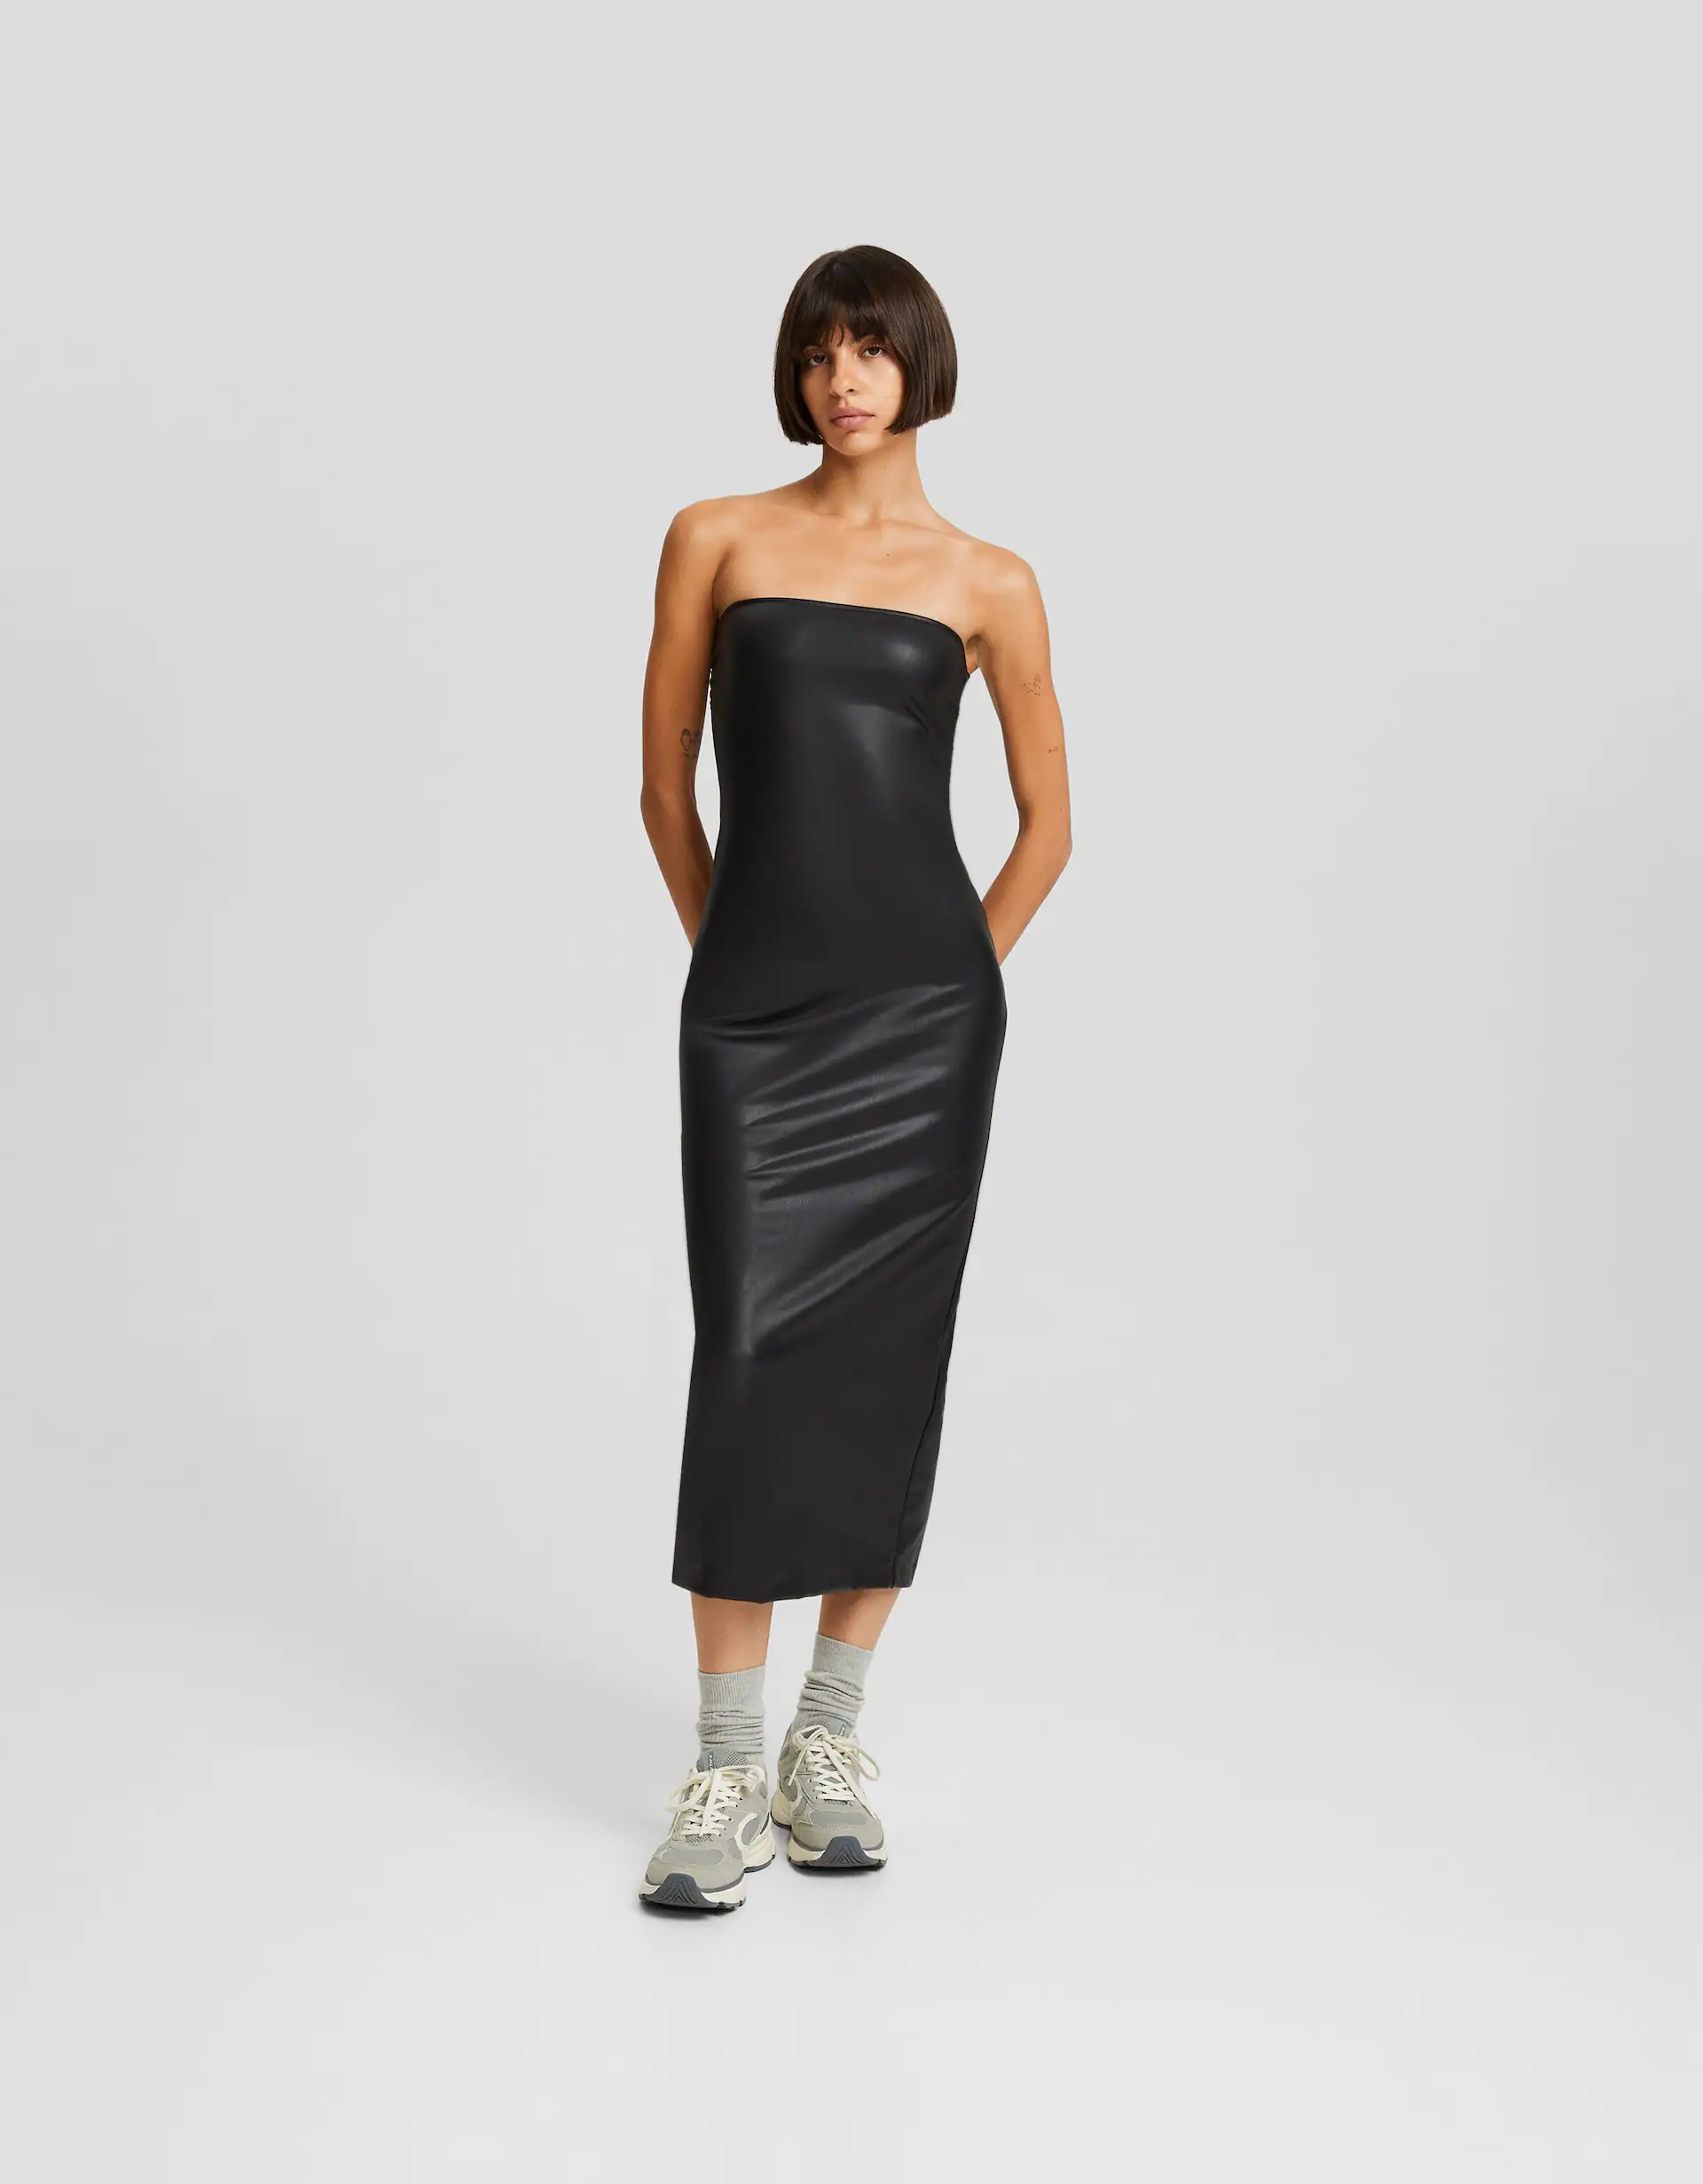 Bershka strapless faux leather bodycon dress in brown